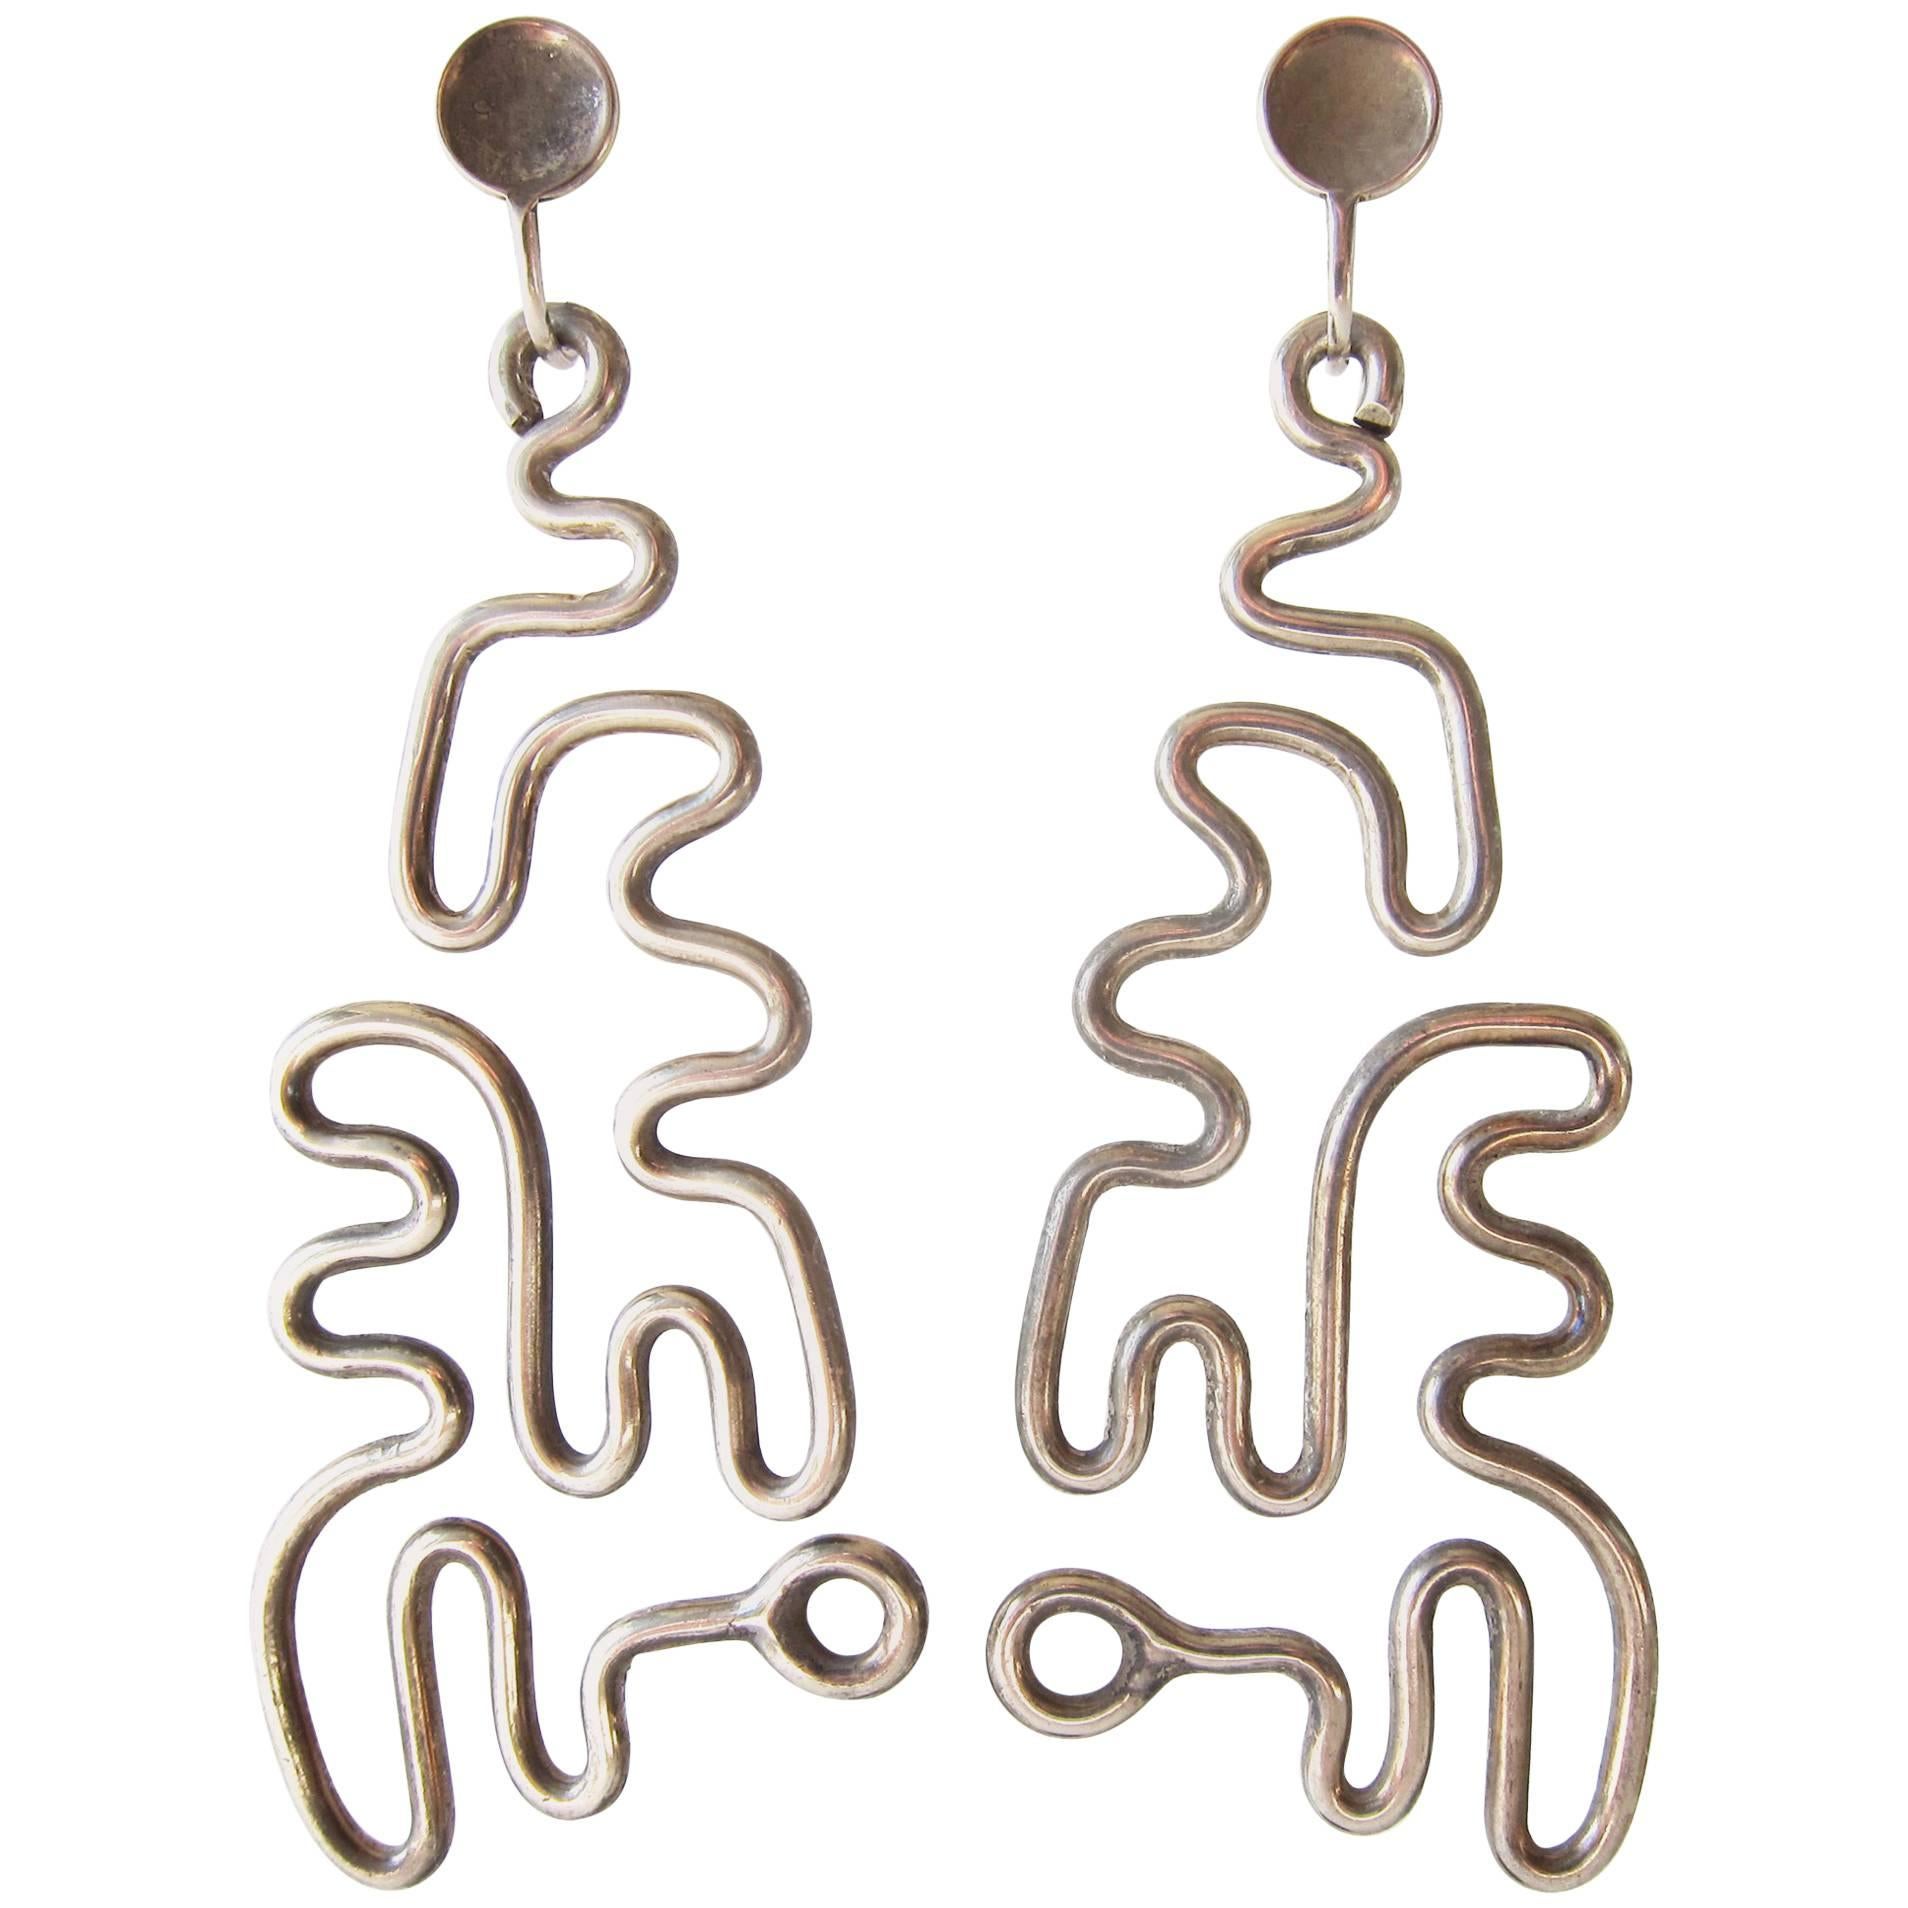 Milton Cavagnaro Sterling Silver Modernist Puzzle Earrings